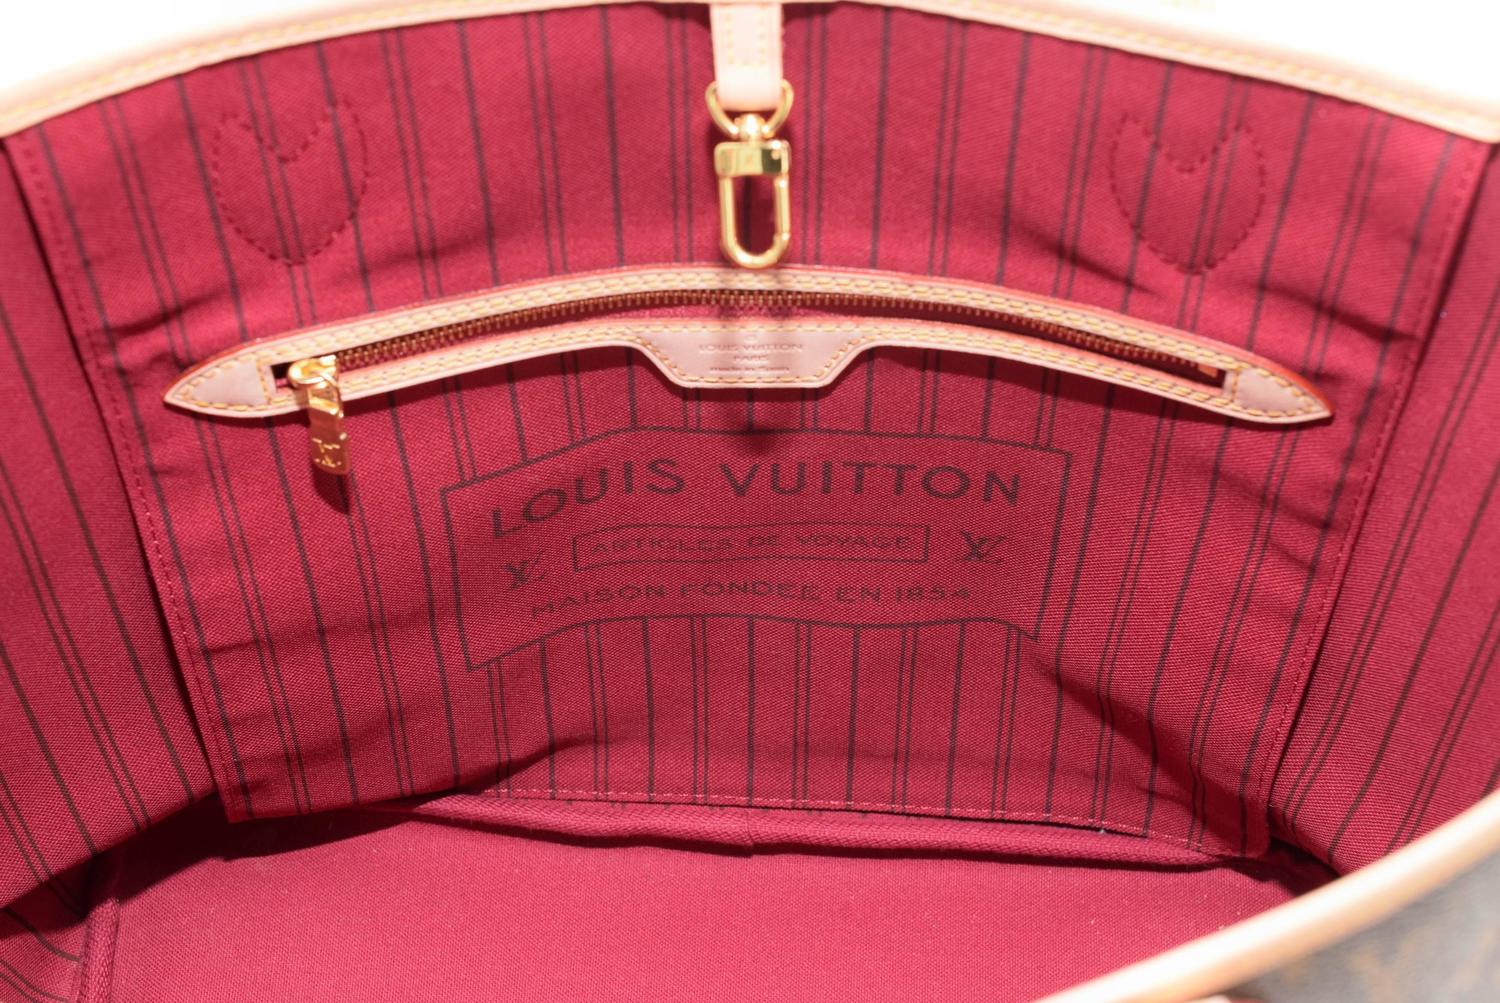 Louis Vuitton Handbag Pink Inside | Confederated Tribes of the Umatilla Indian Reservation